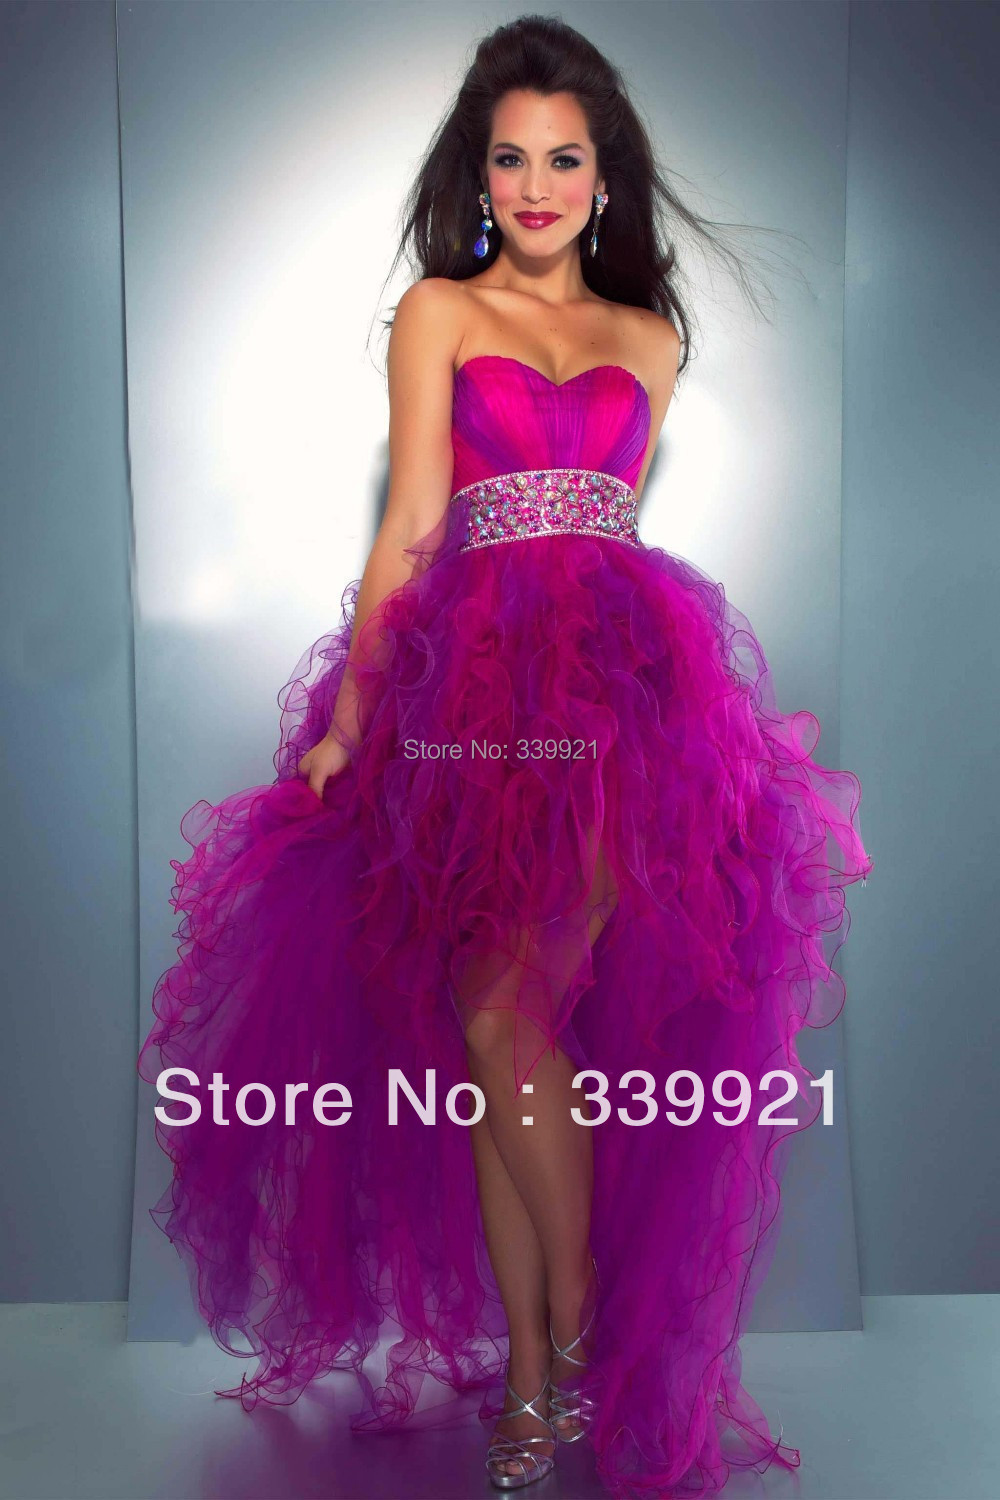 Neon Pink Prom Dress - Cocktail Dresses 2016